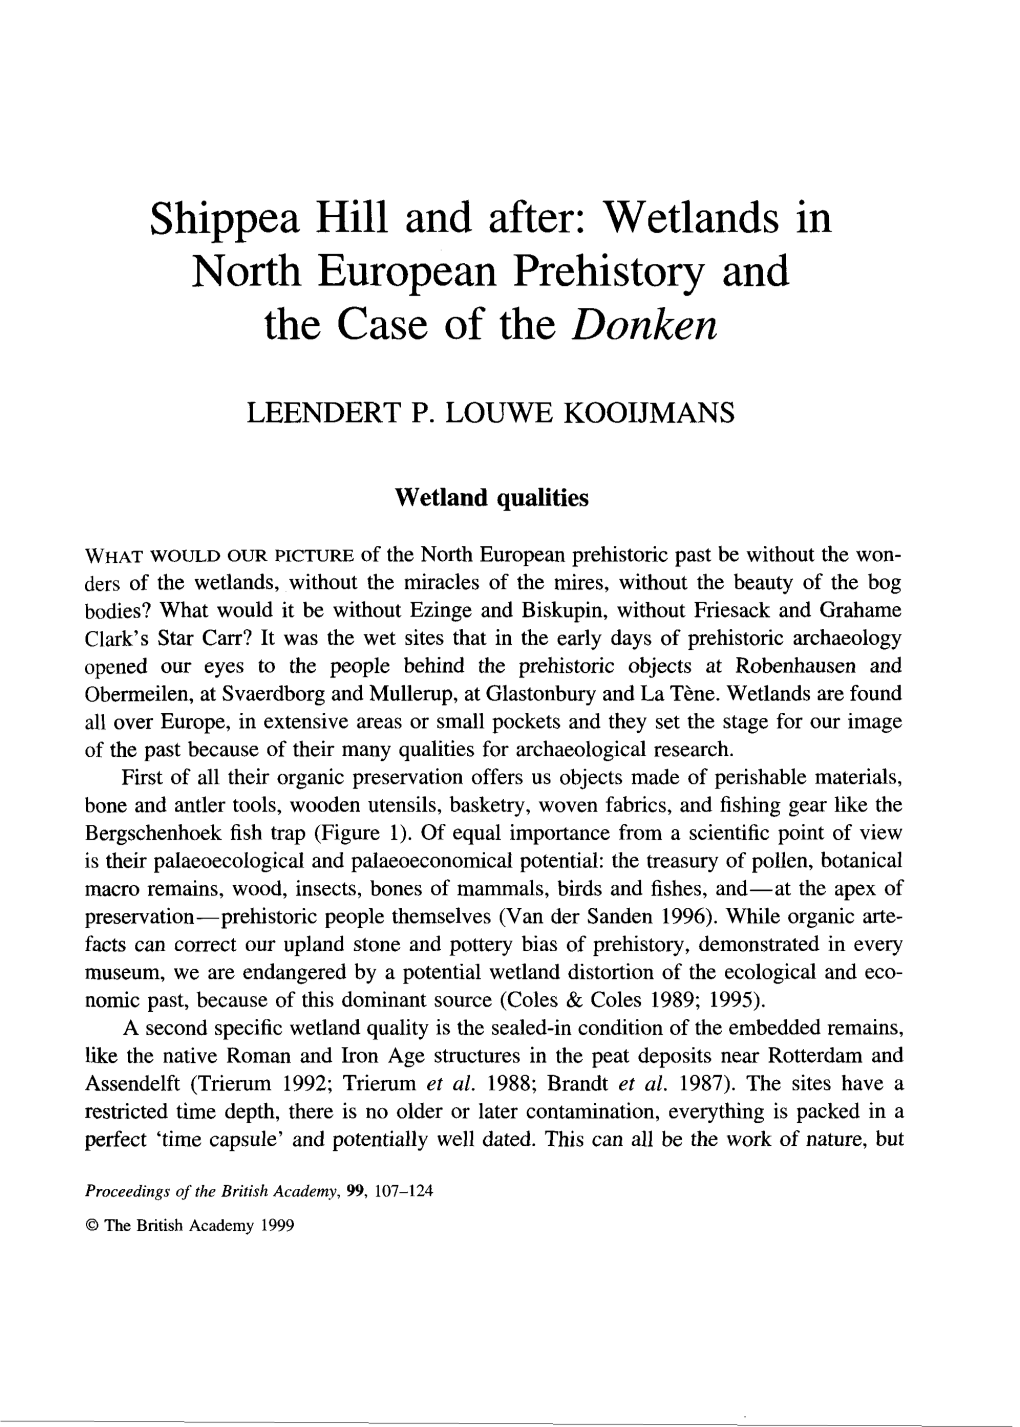 Shippea Hill and After: Wetlands in North European Prehistory and the Case of the Donken